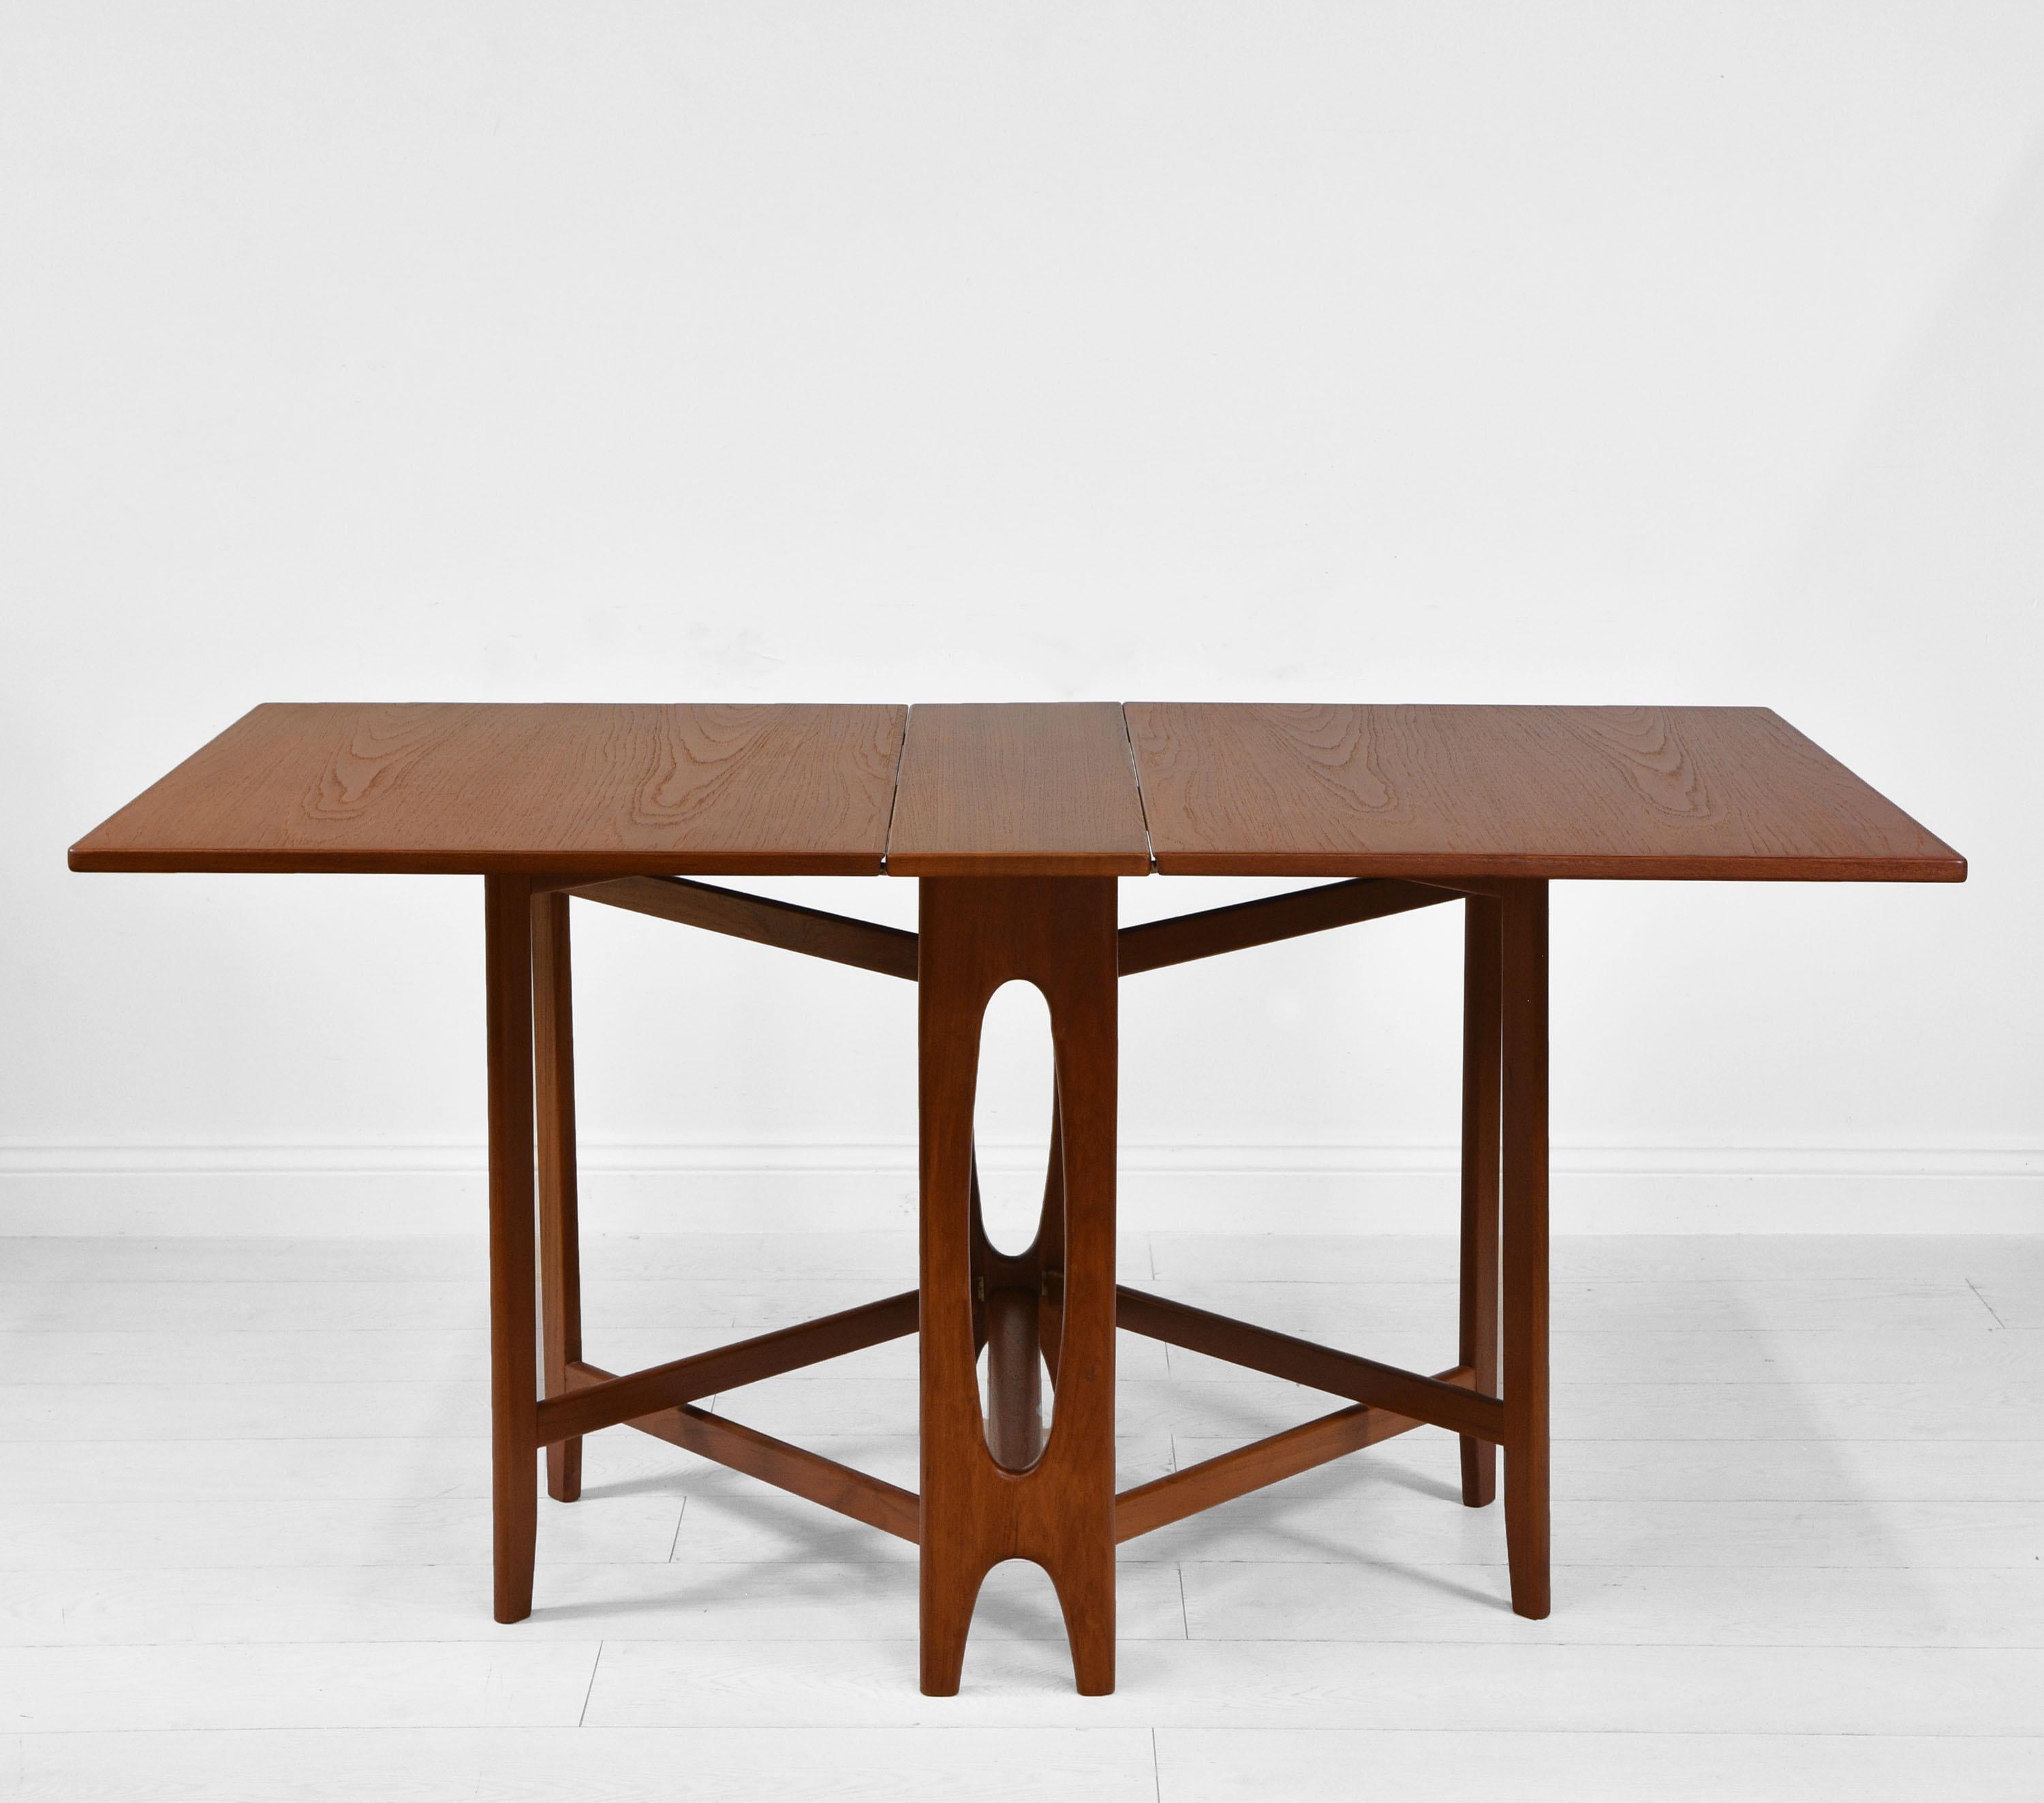 A mid-century teak drop leaf dining table designed by Bendt Winge by Kleppe Møbelfabrikk. Norwegian. Circa 1950's.

This space saving design was known as the 'flap table number 2'. 

Bendt Winge was one of the first professional interior